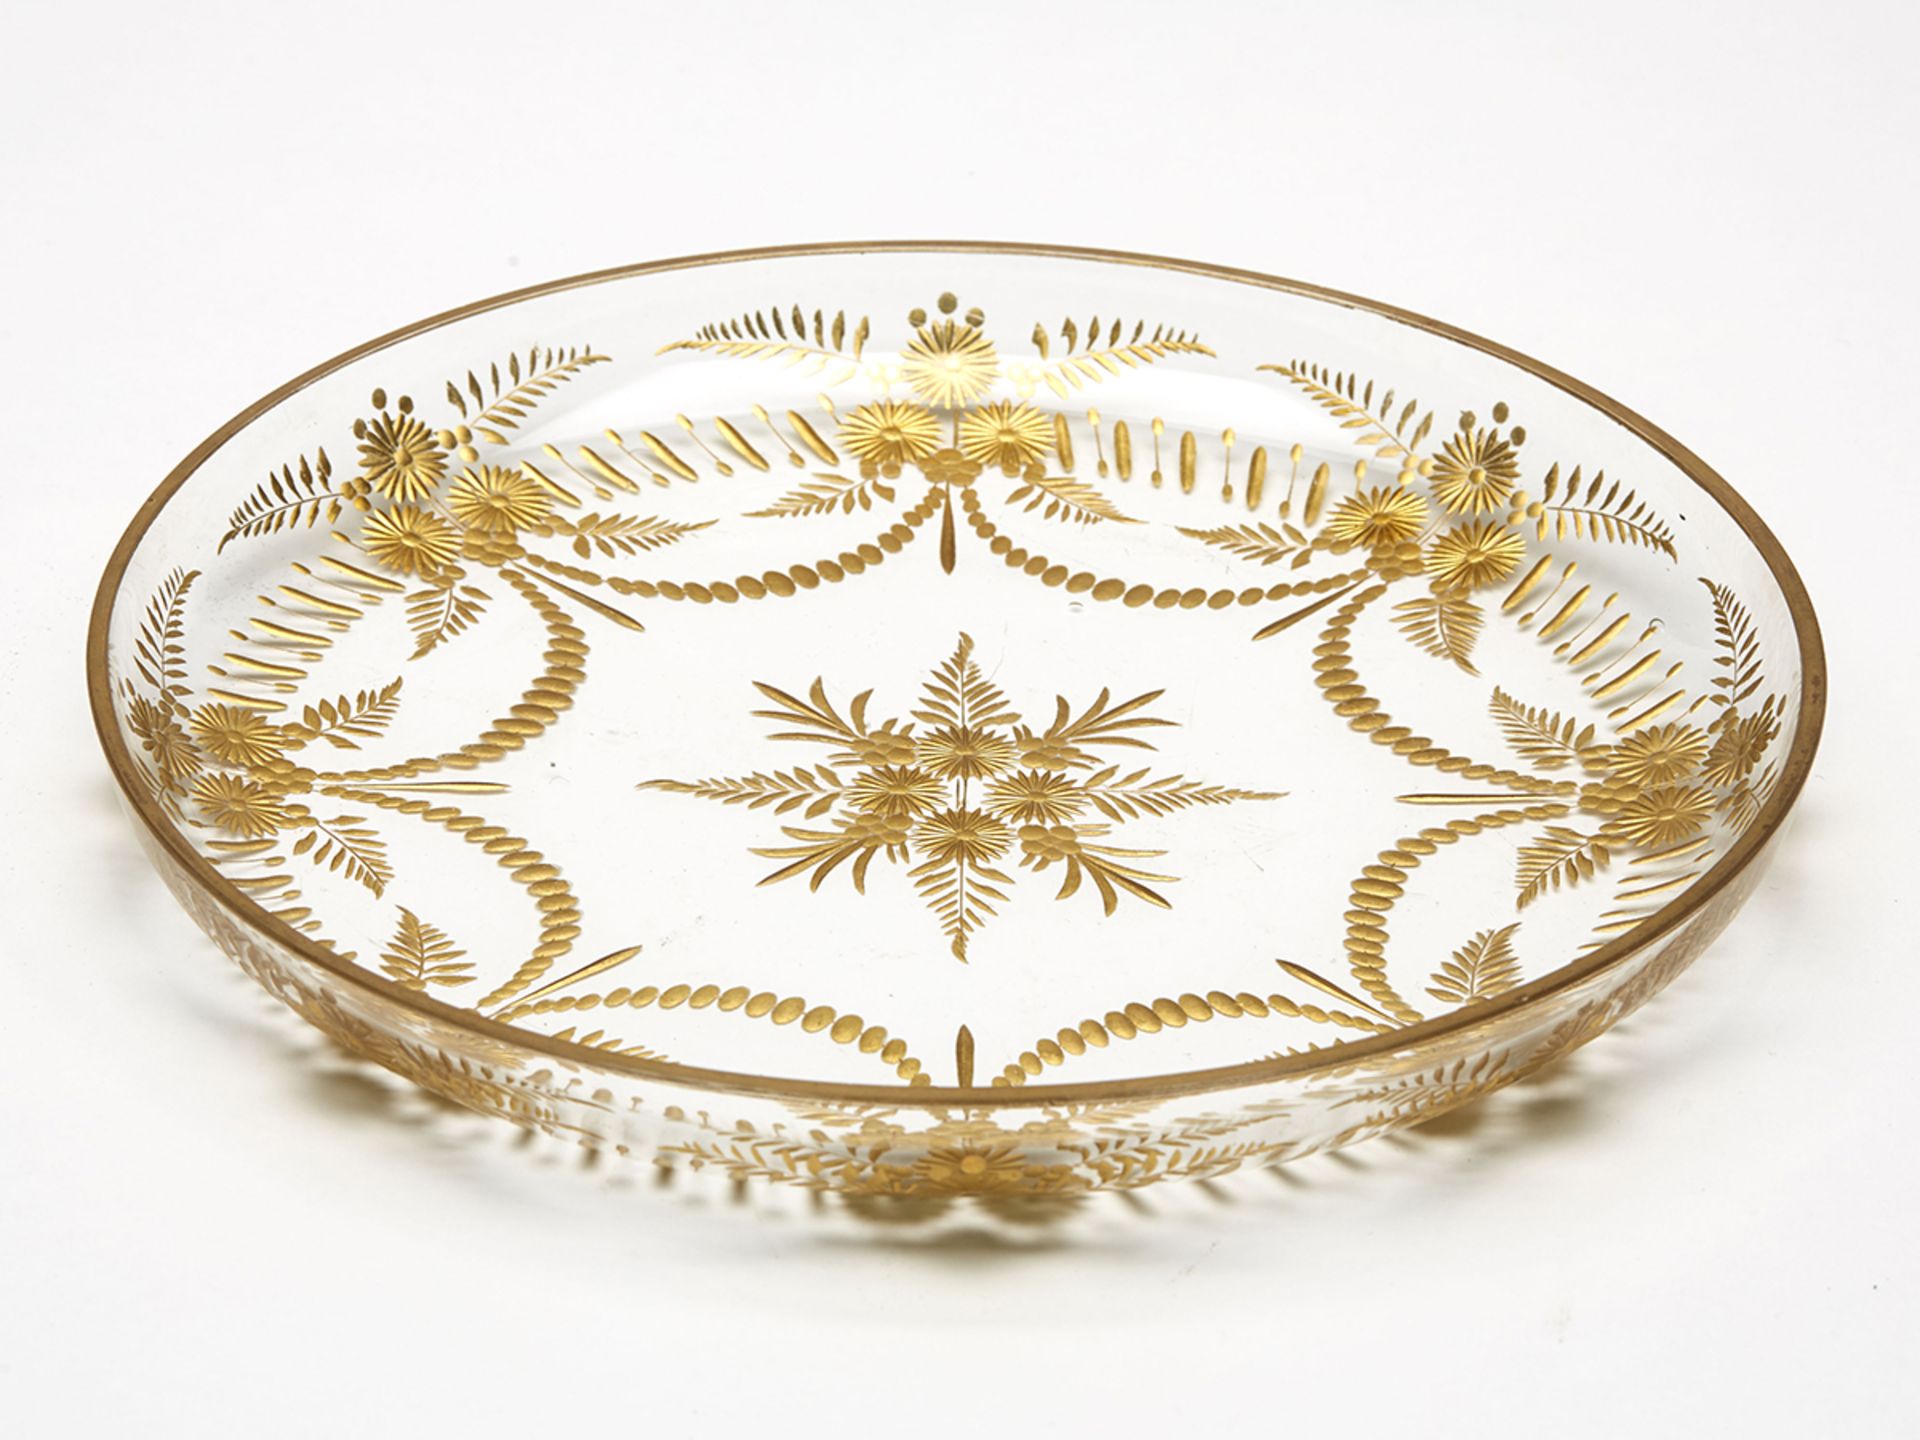 Stunning Antique Engraved And Gilded Glass Tray 19Th C. - Image 4 of 5